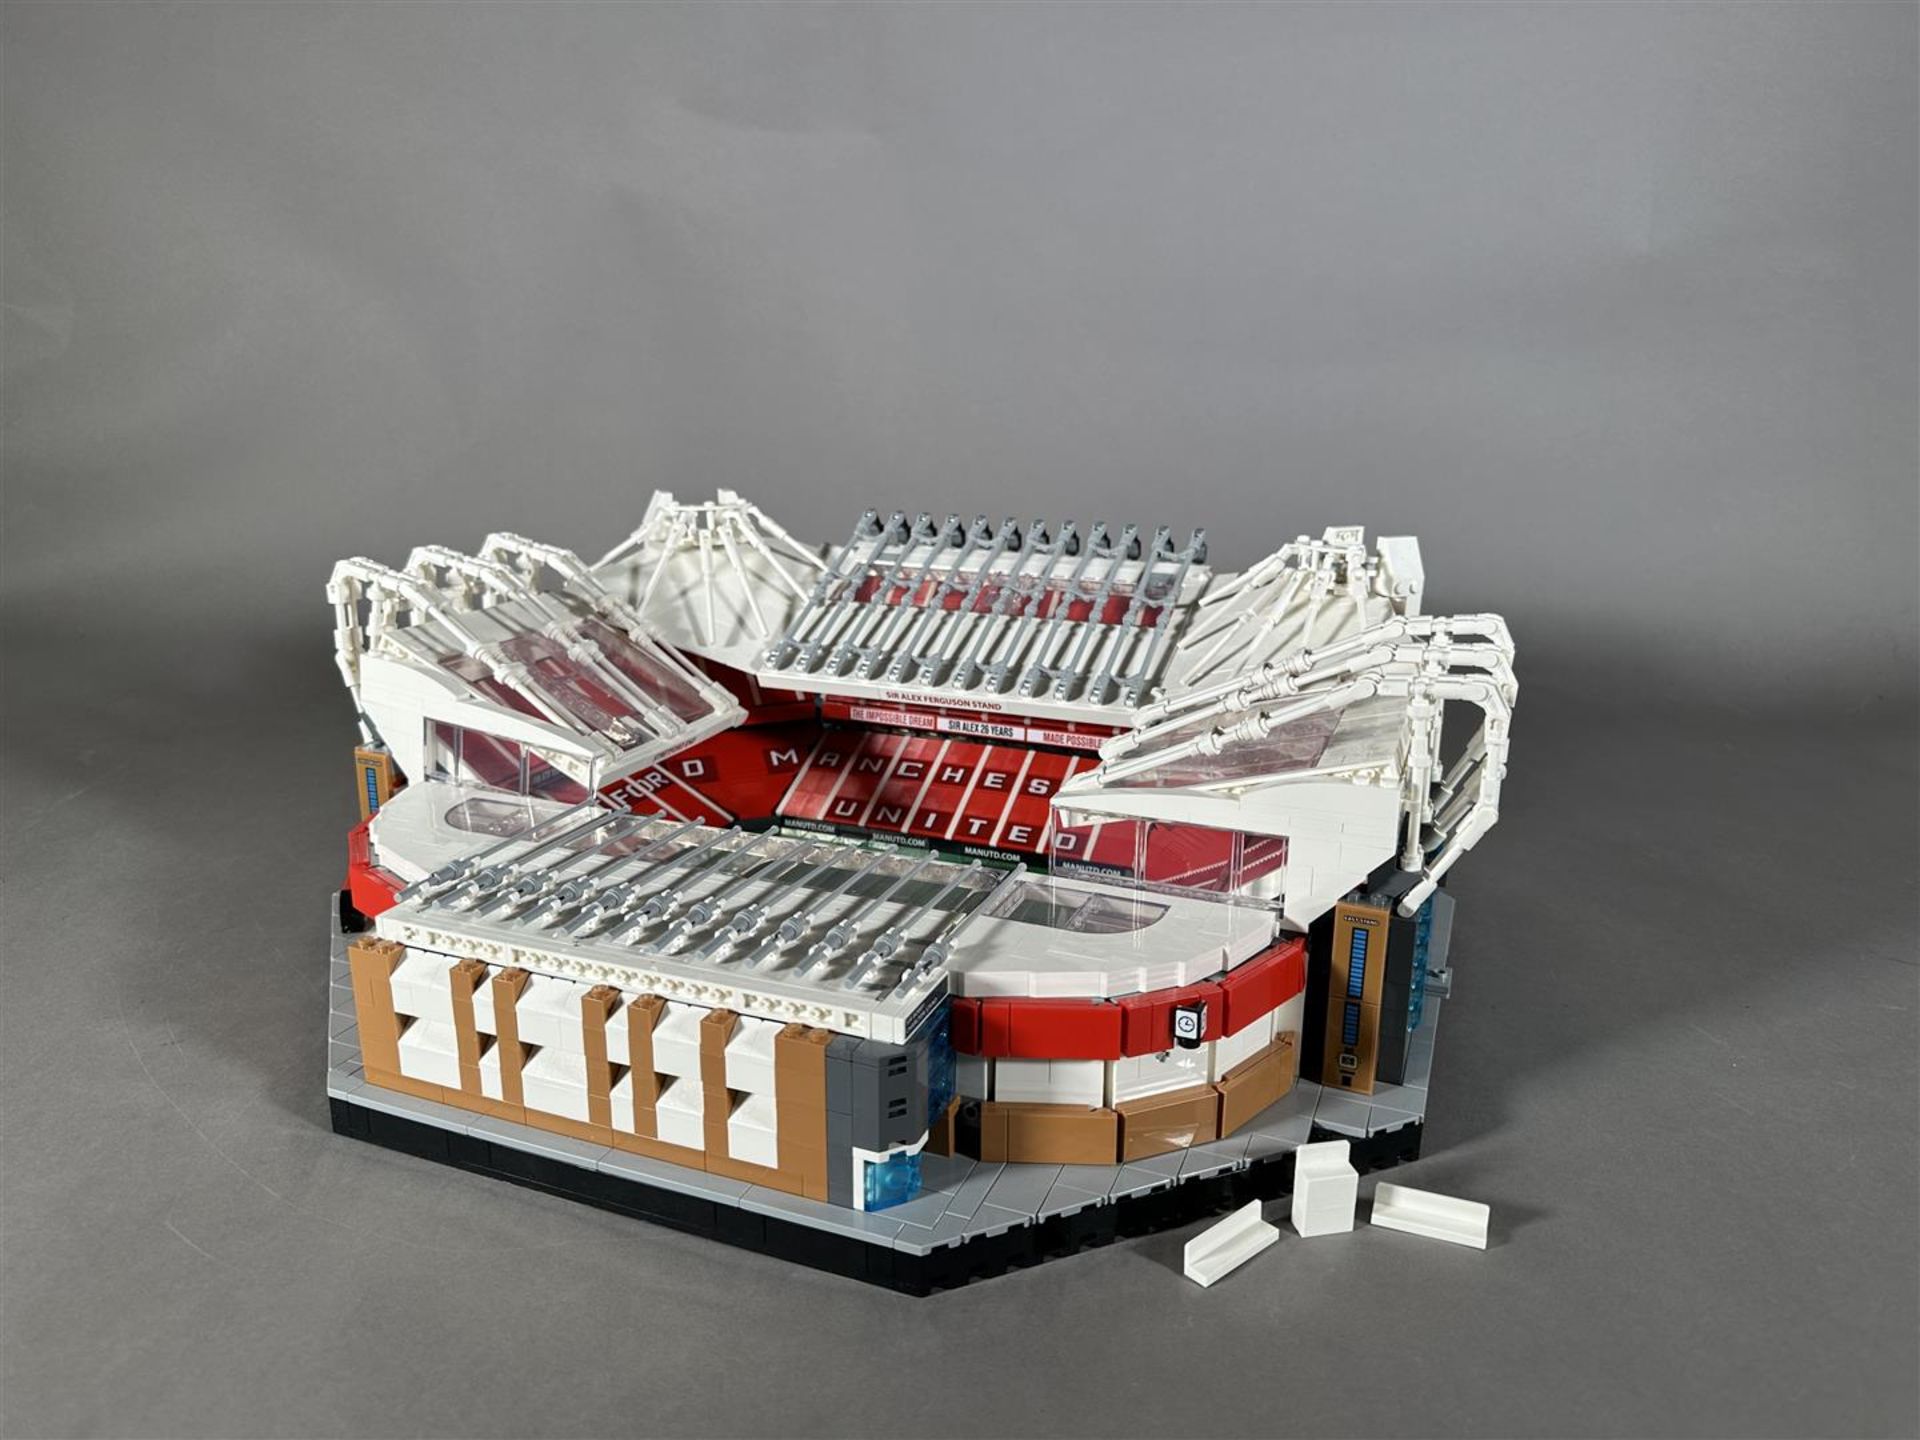 LEGO Creator Expert Old Trafford Manchester United - 10272 - Image 3 of 3